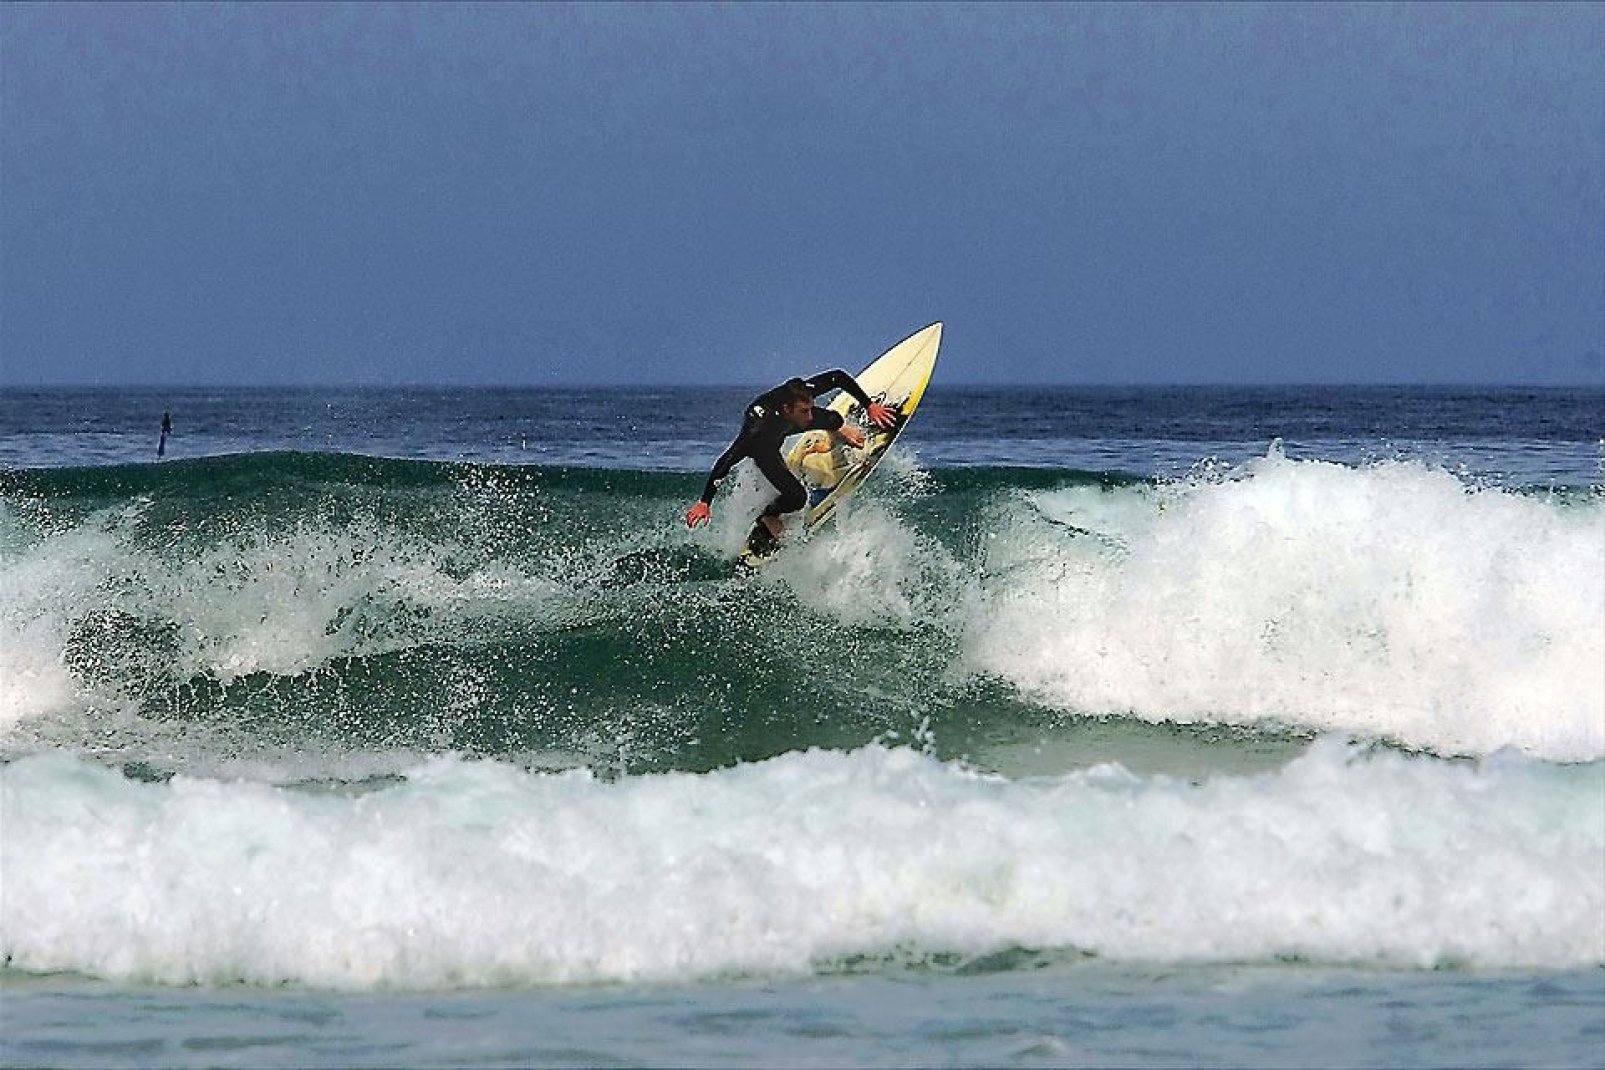 Cherbourg is one of the best spots for surfing in Normandy. The waves can reach over 3 metres high.